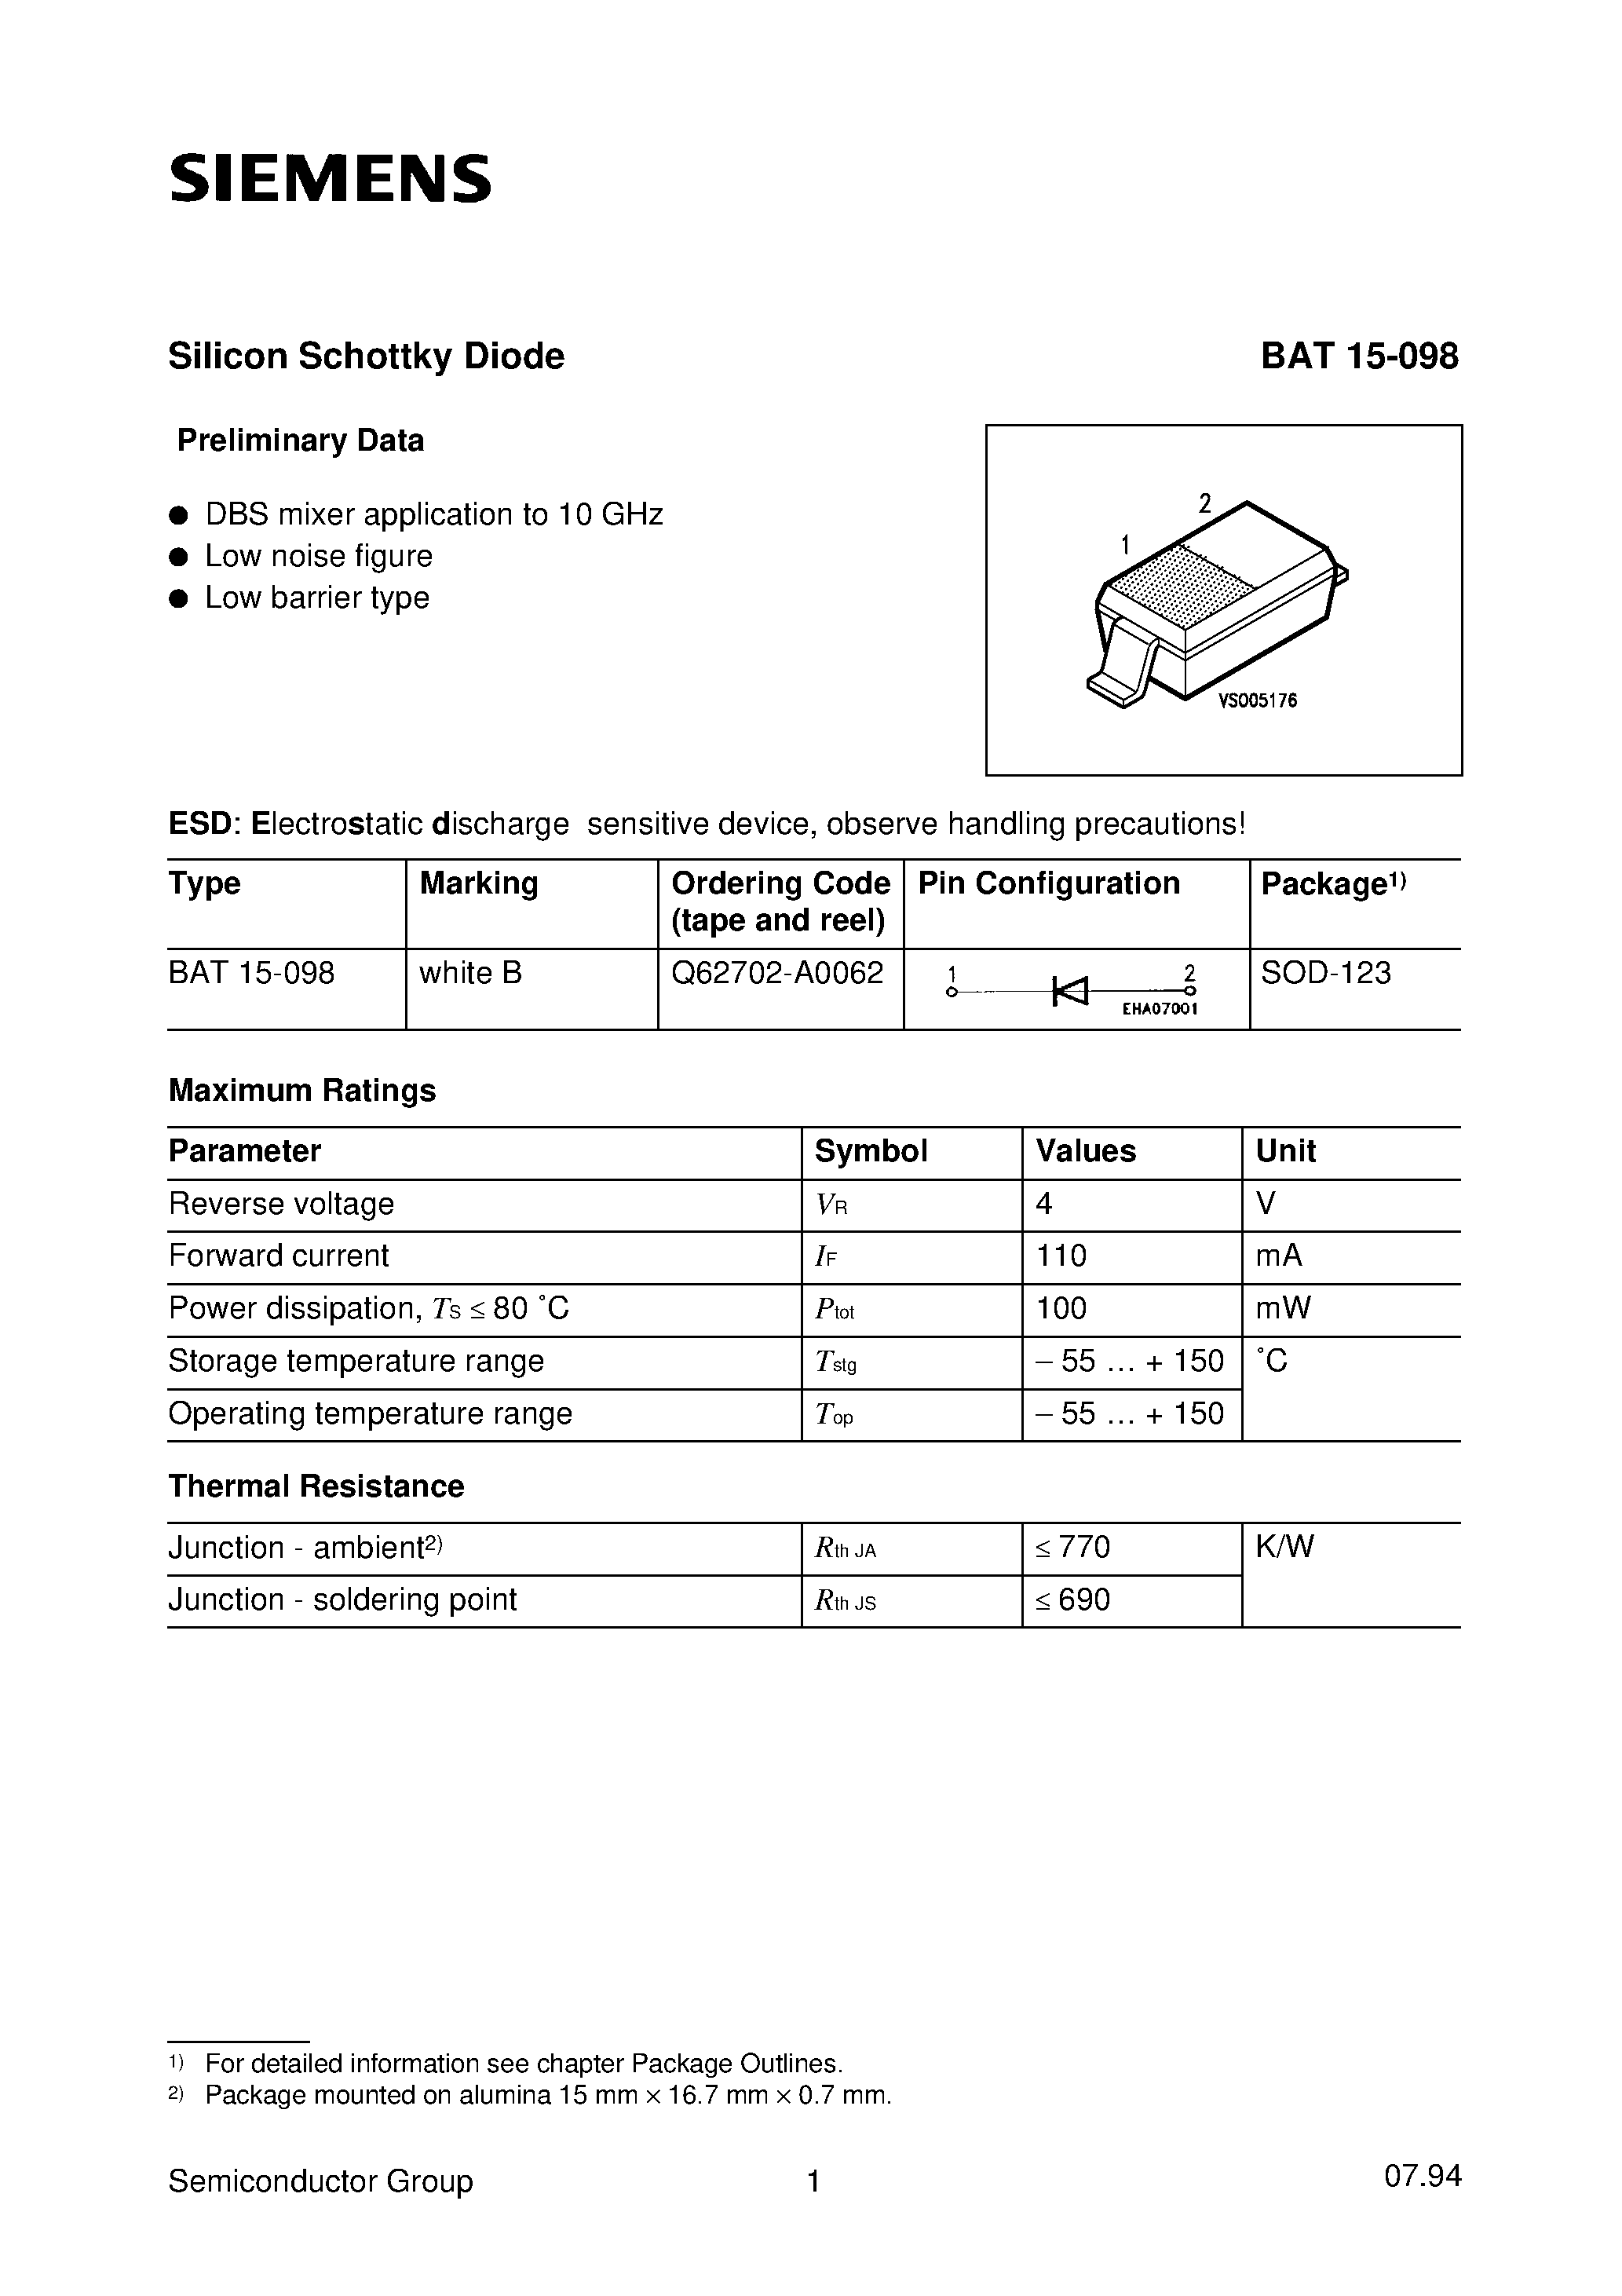 Datasheet BAT15-098 - Silicon Schottky Diode (DBS mixer application to 10 GHz Low noise figure Low barrier type) page 1